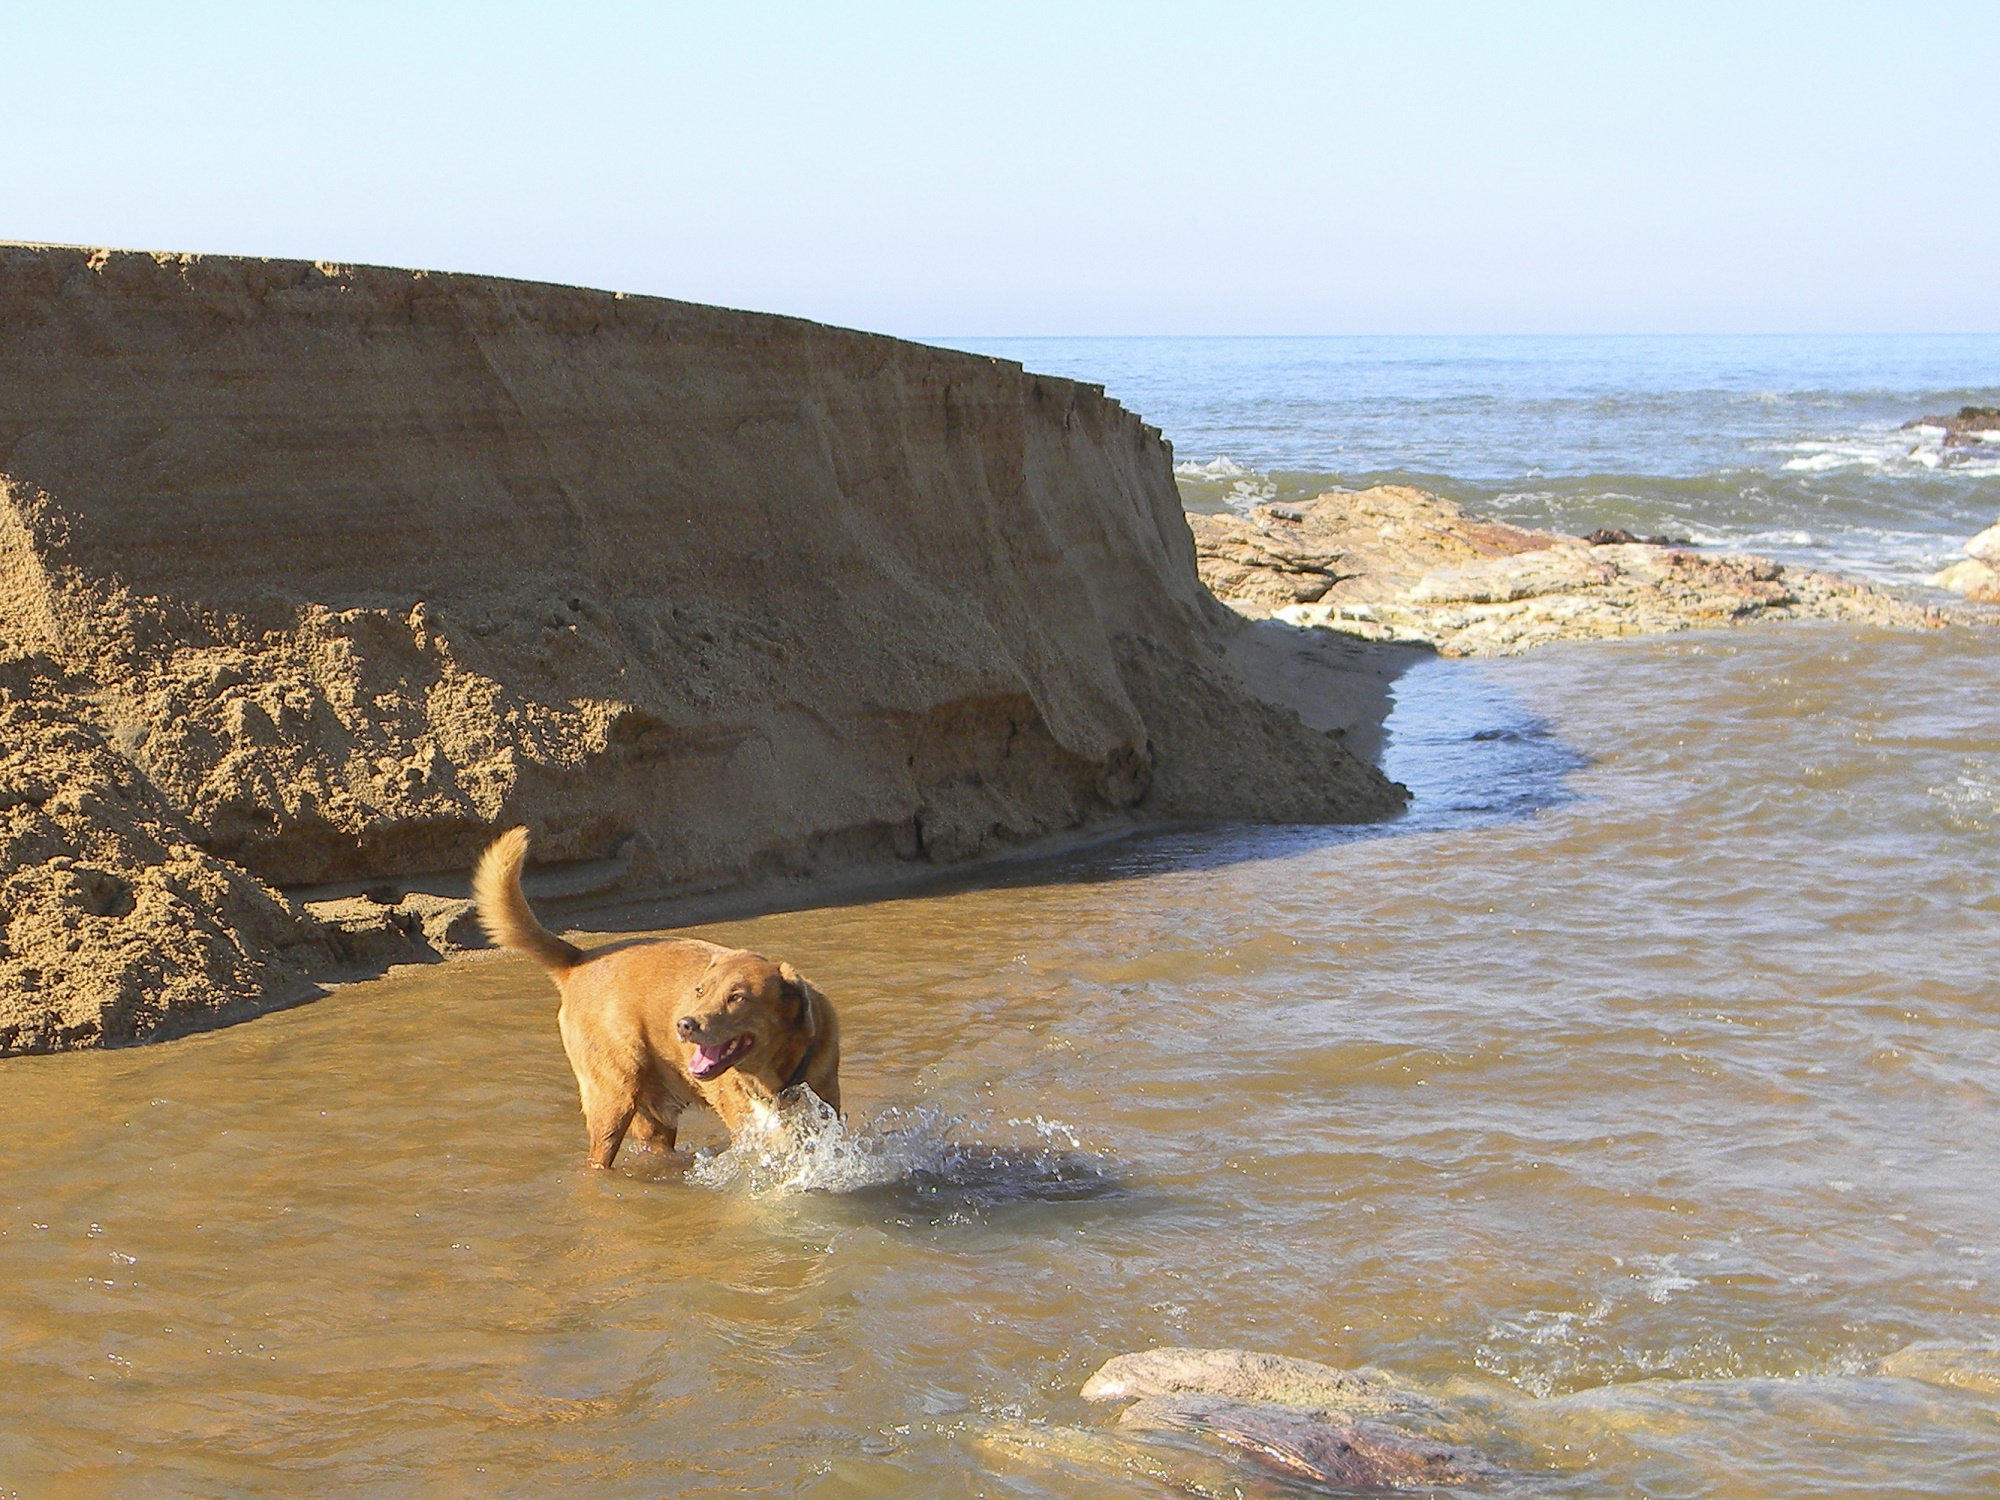 Dog playing in the Mhlangamkulu River mouth